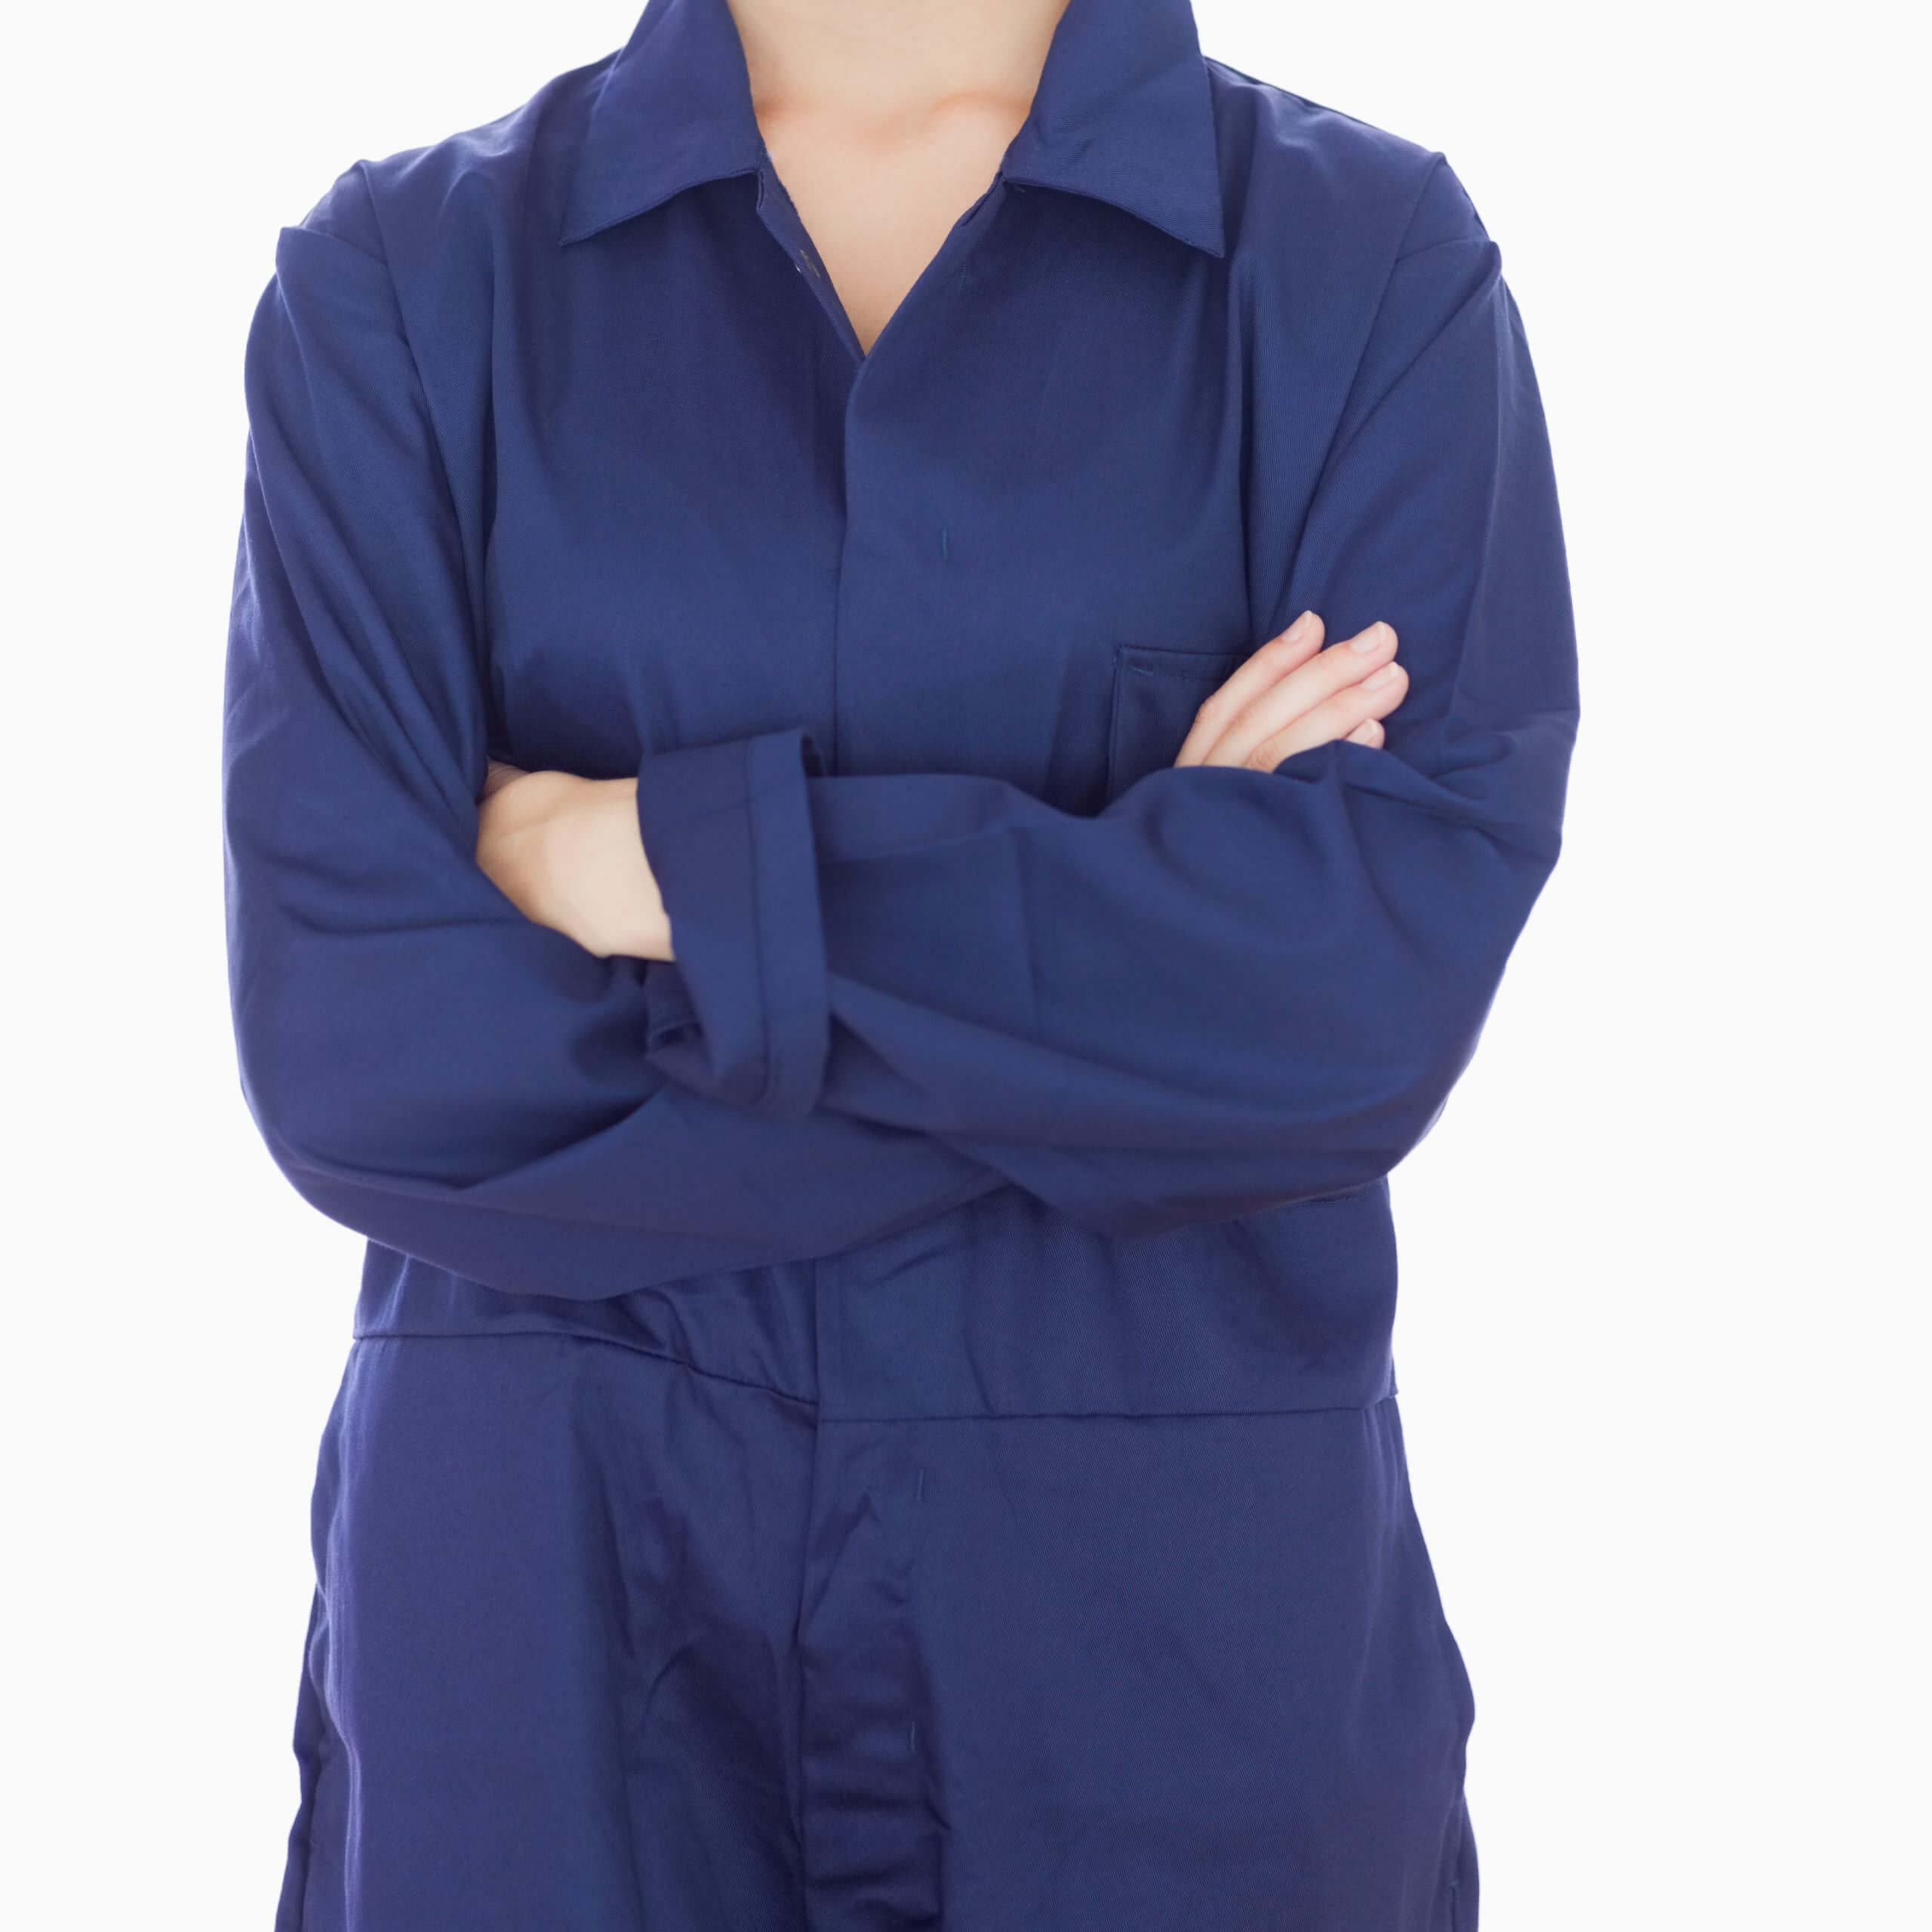 An image of our Clothing Coveralls.